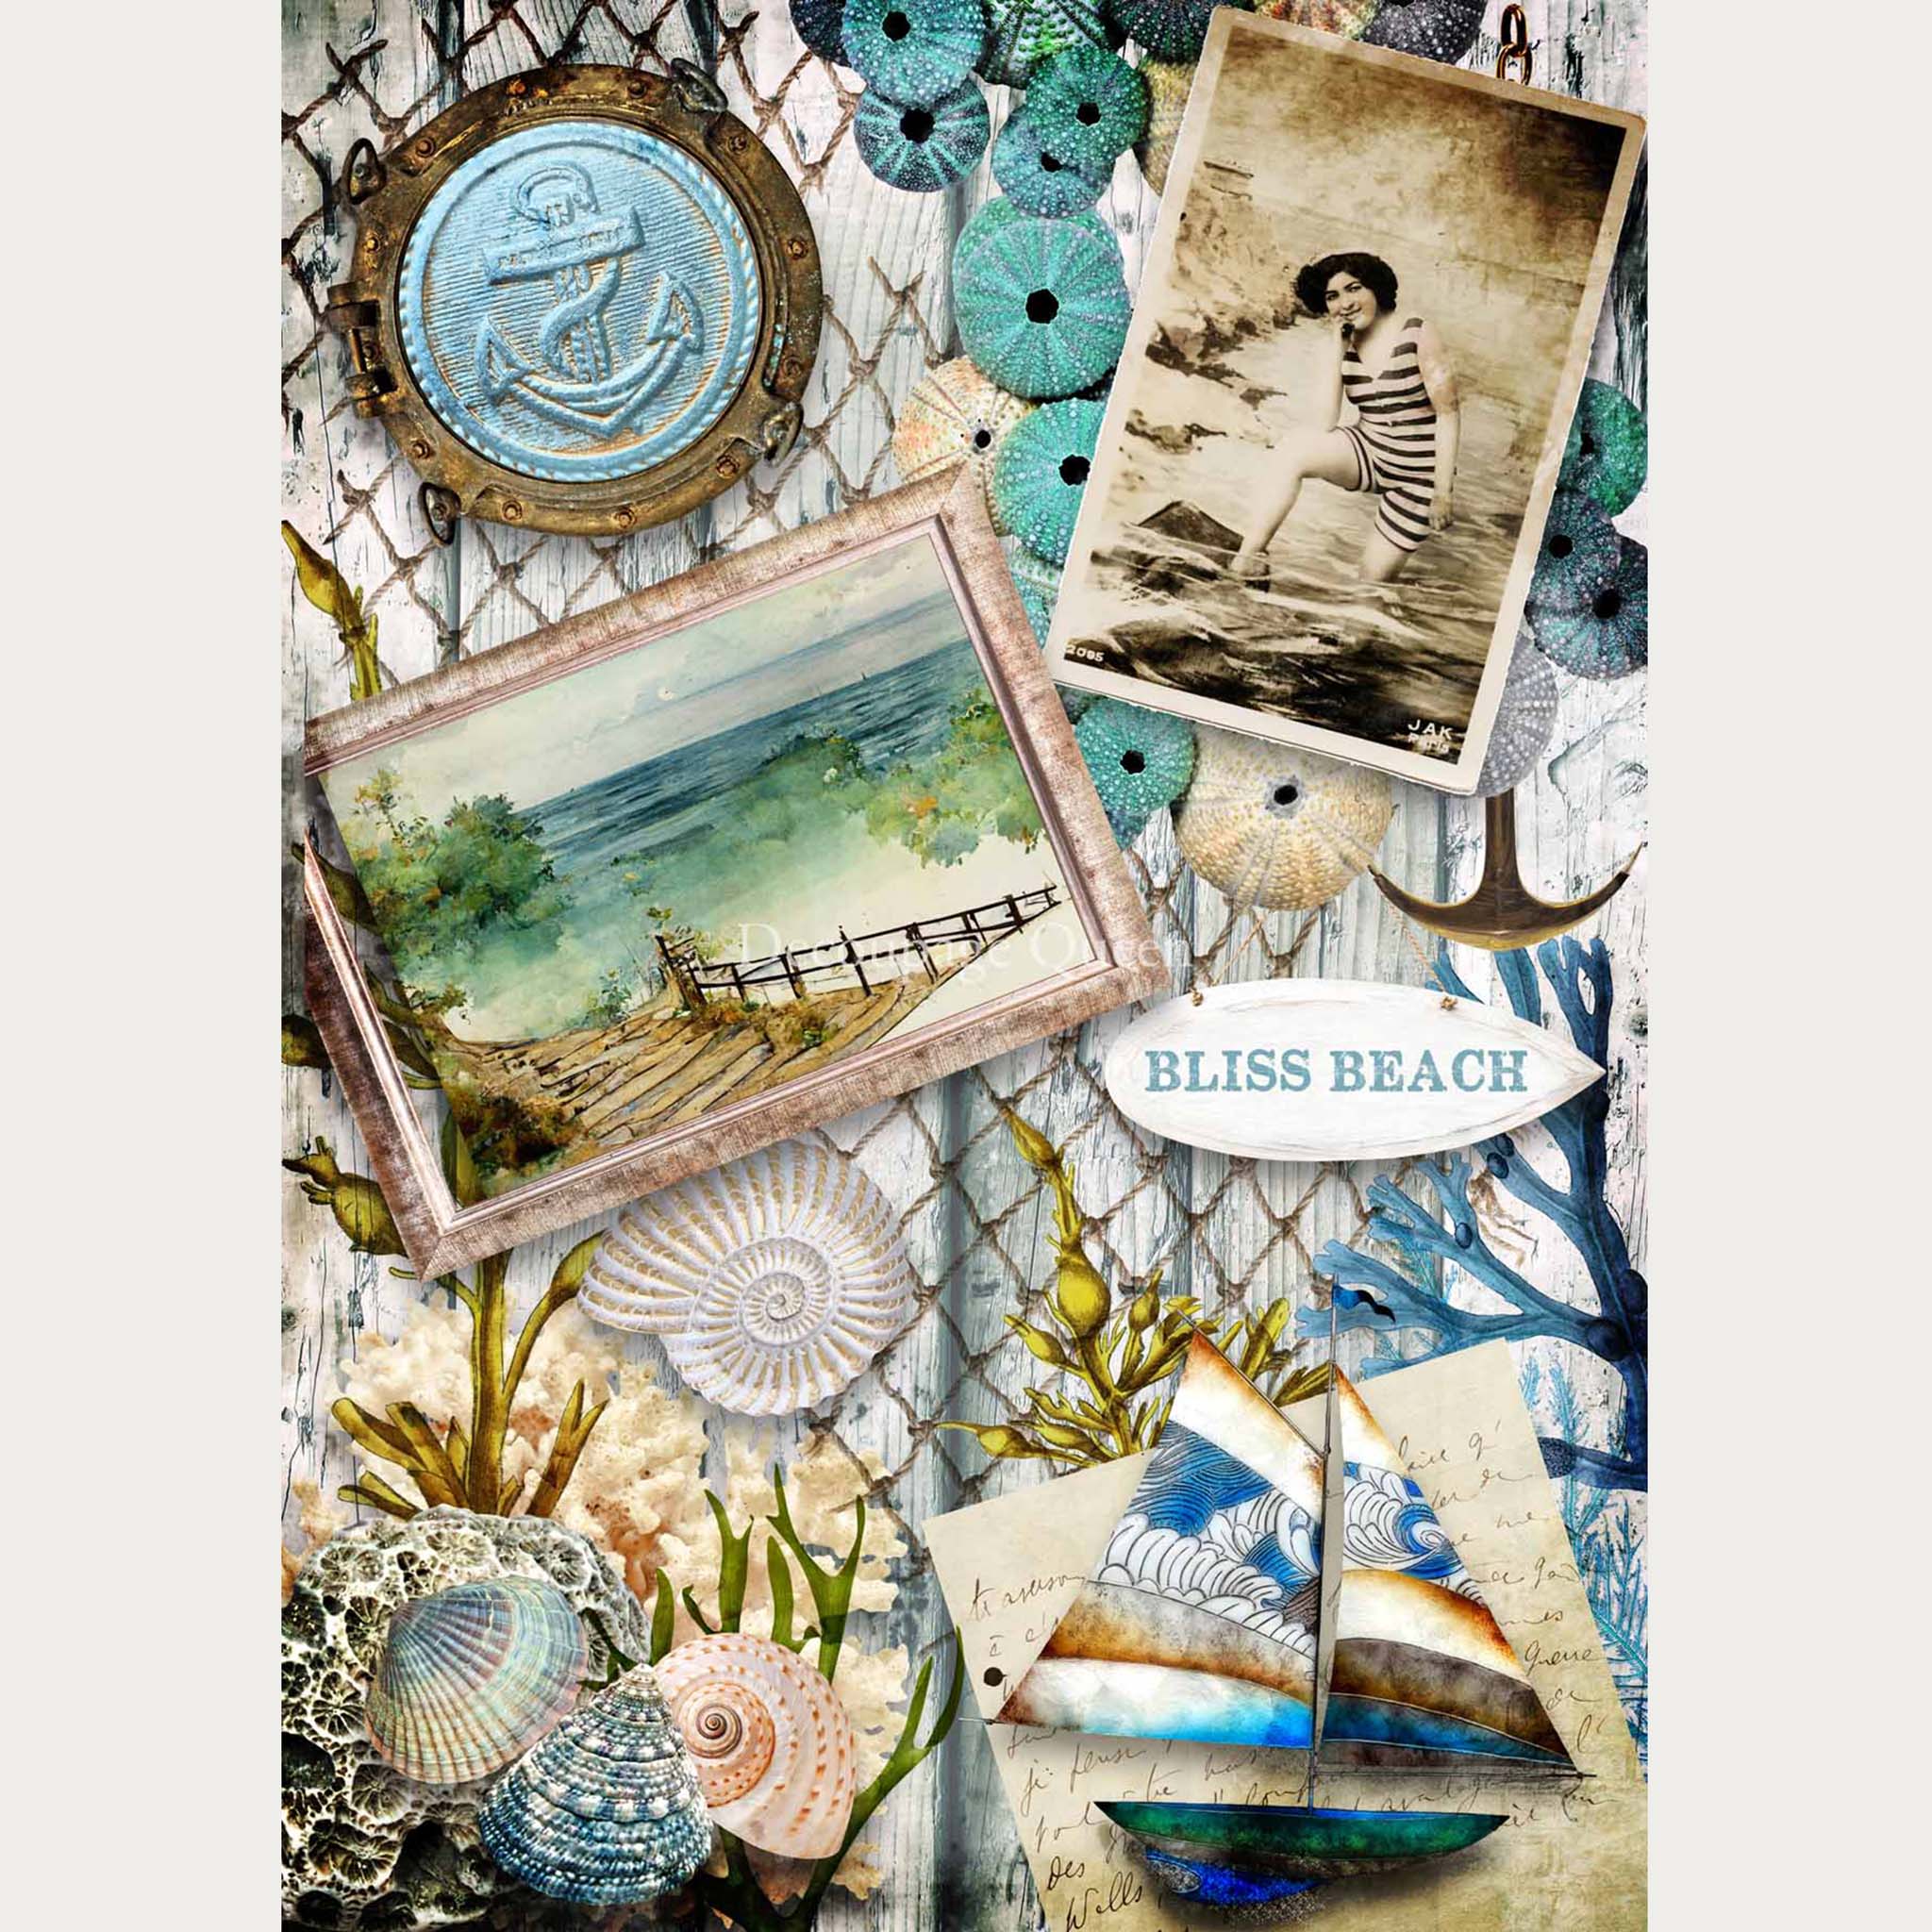 A3 rice paper design that features a collage of beach items and photos against a wood and netting background. White borders are on the sides.